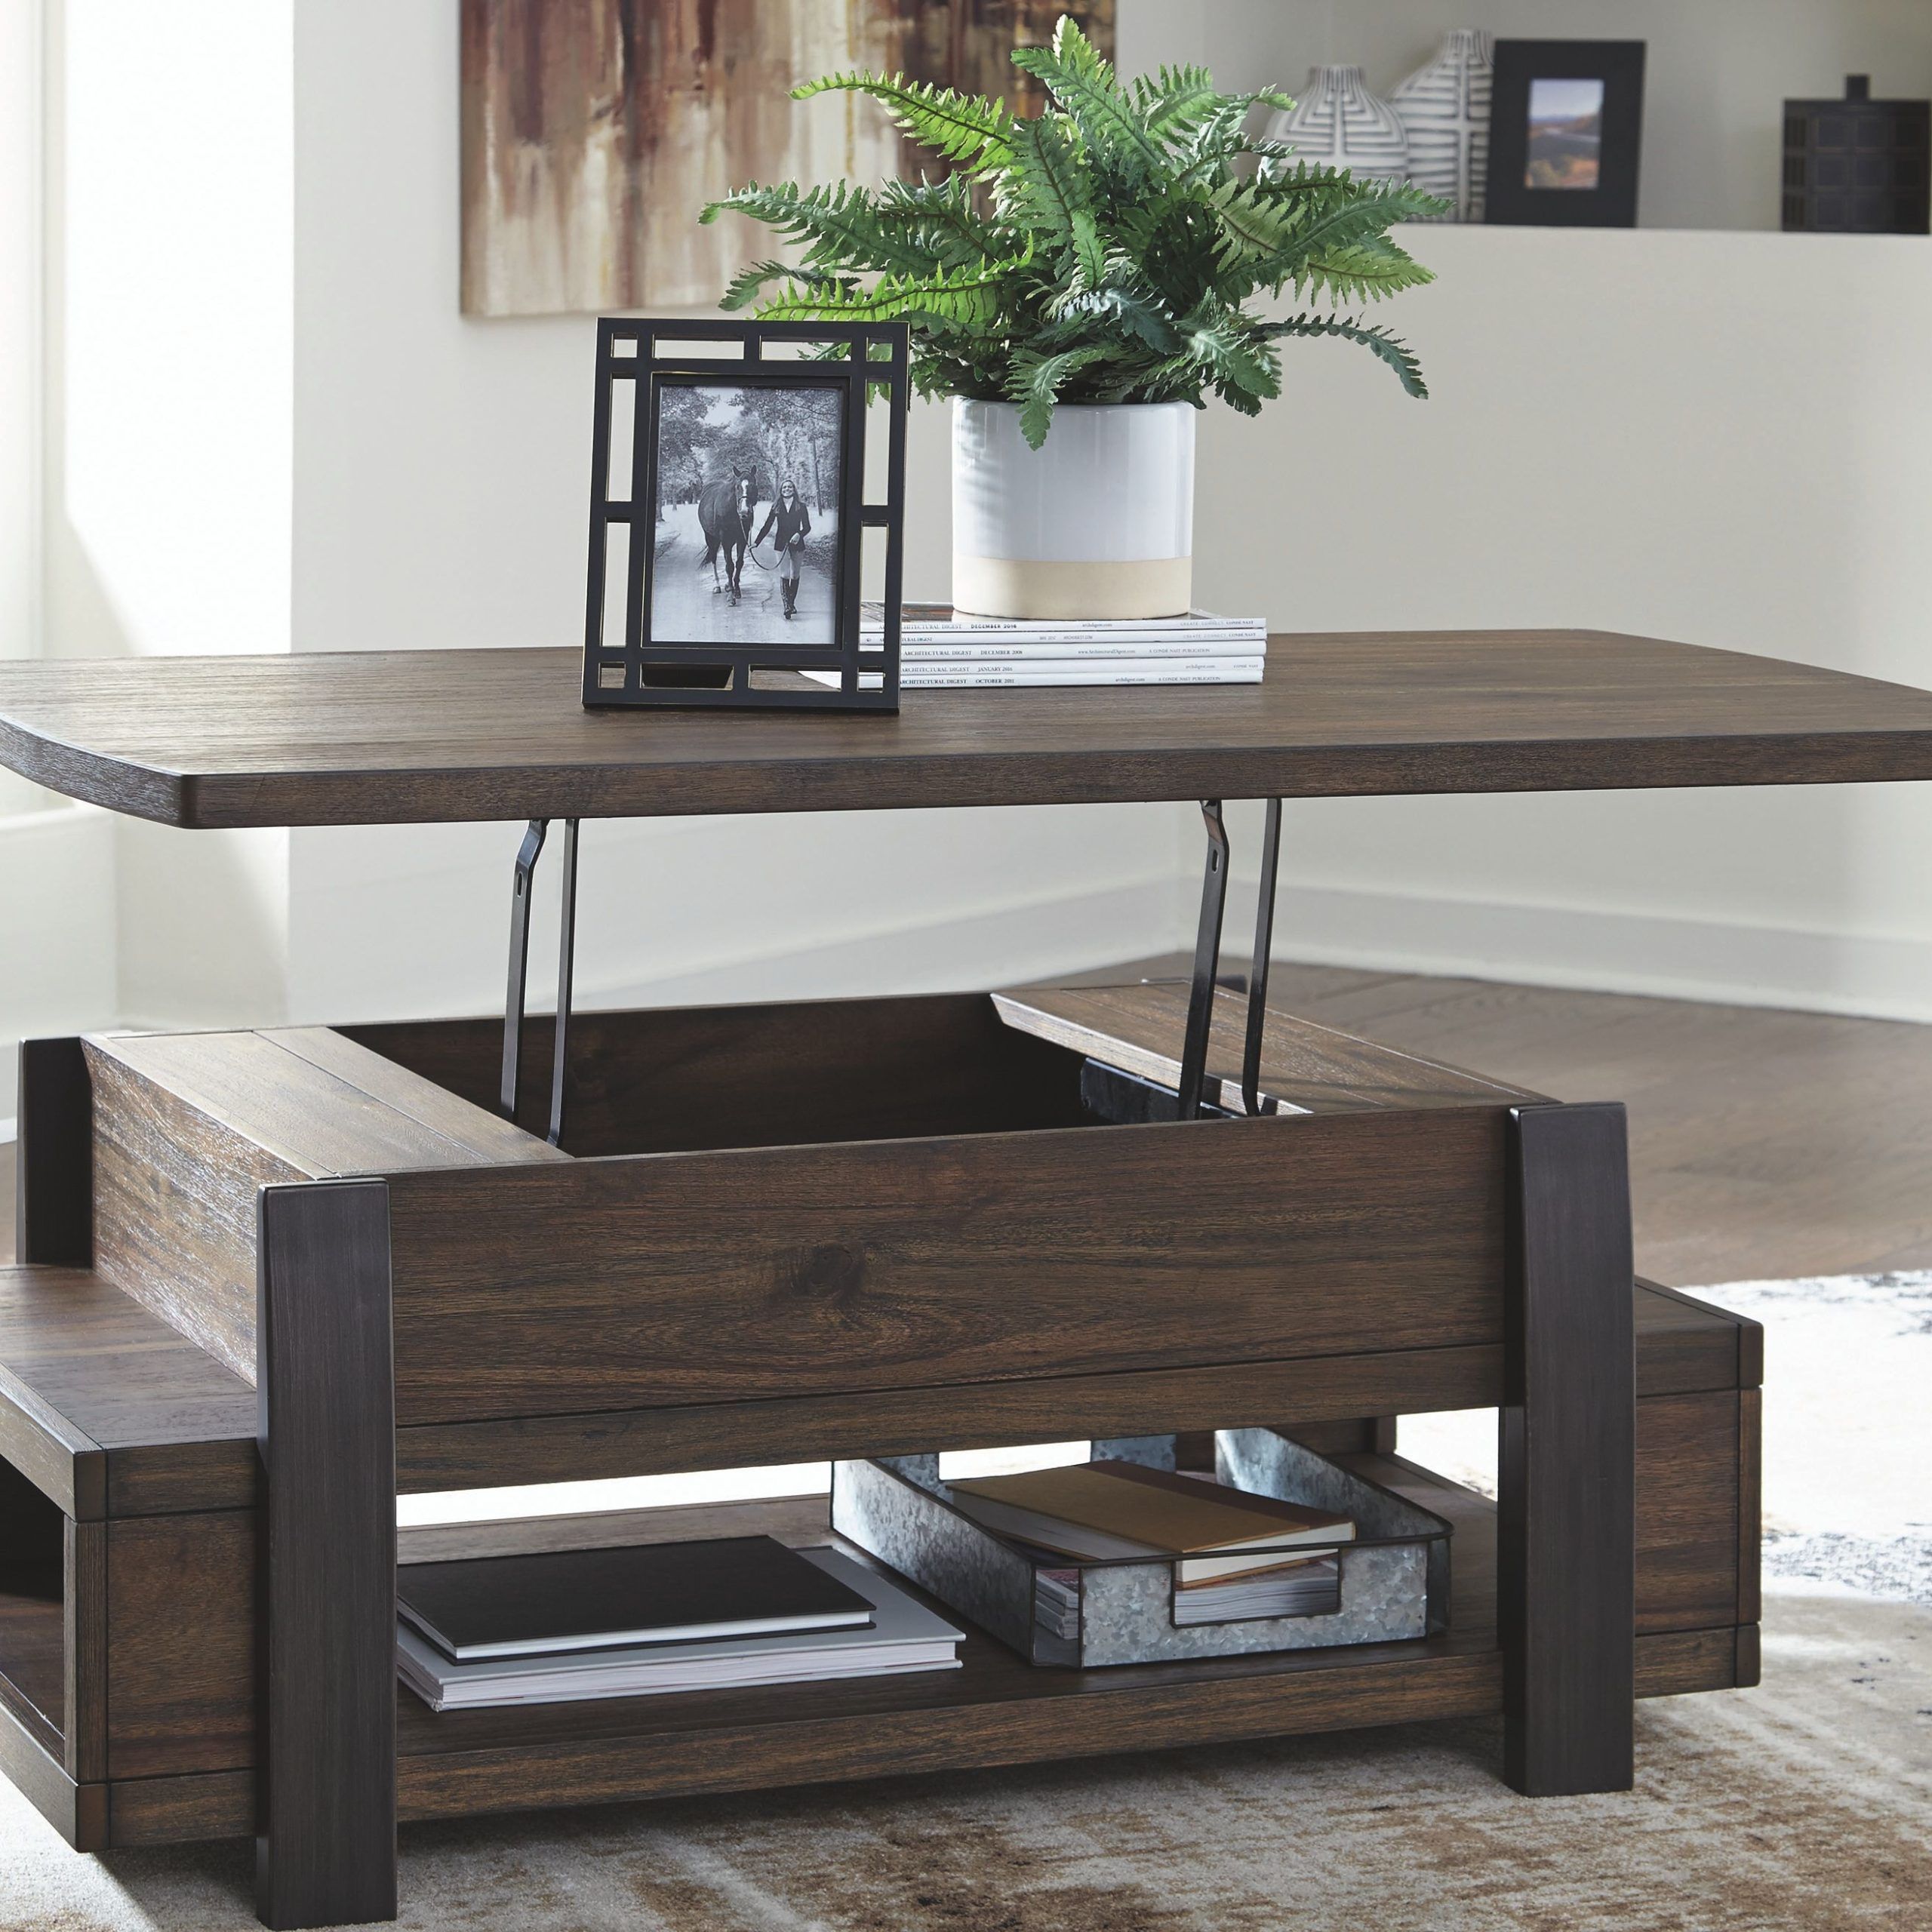 Vailbry Coffee Table With Lift Top, Brown | Lift Top Coffee Table In Wood Lift Top Coffee Tables (View 7 of 20)